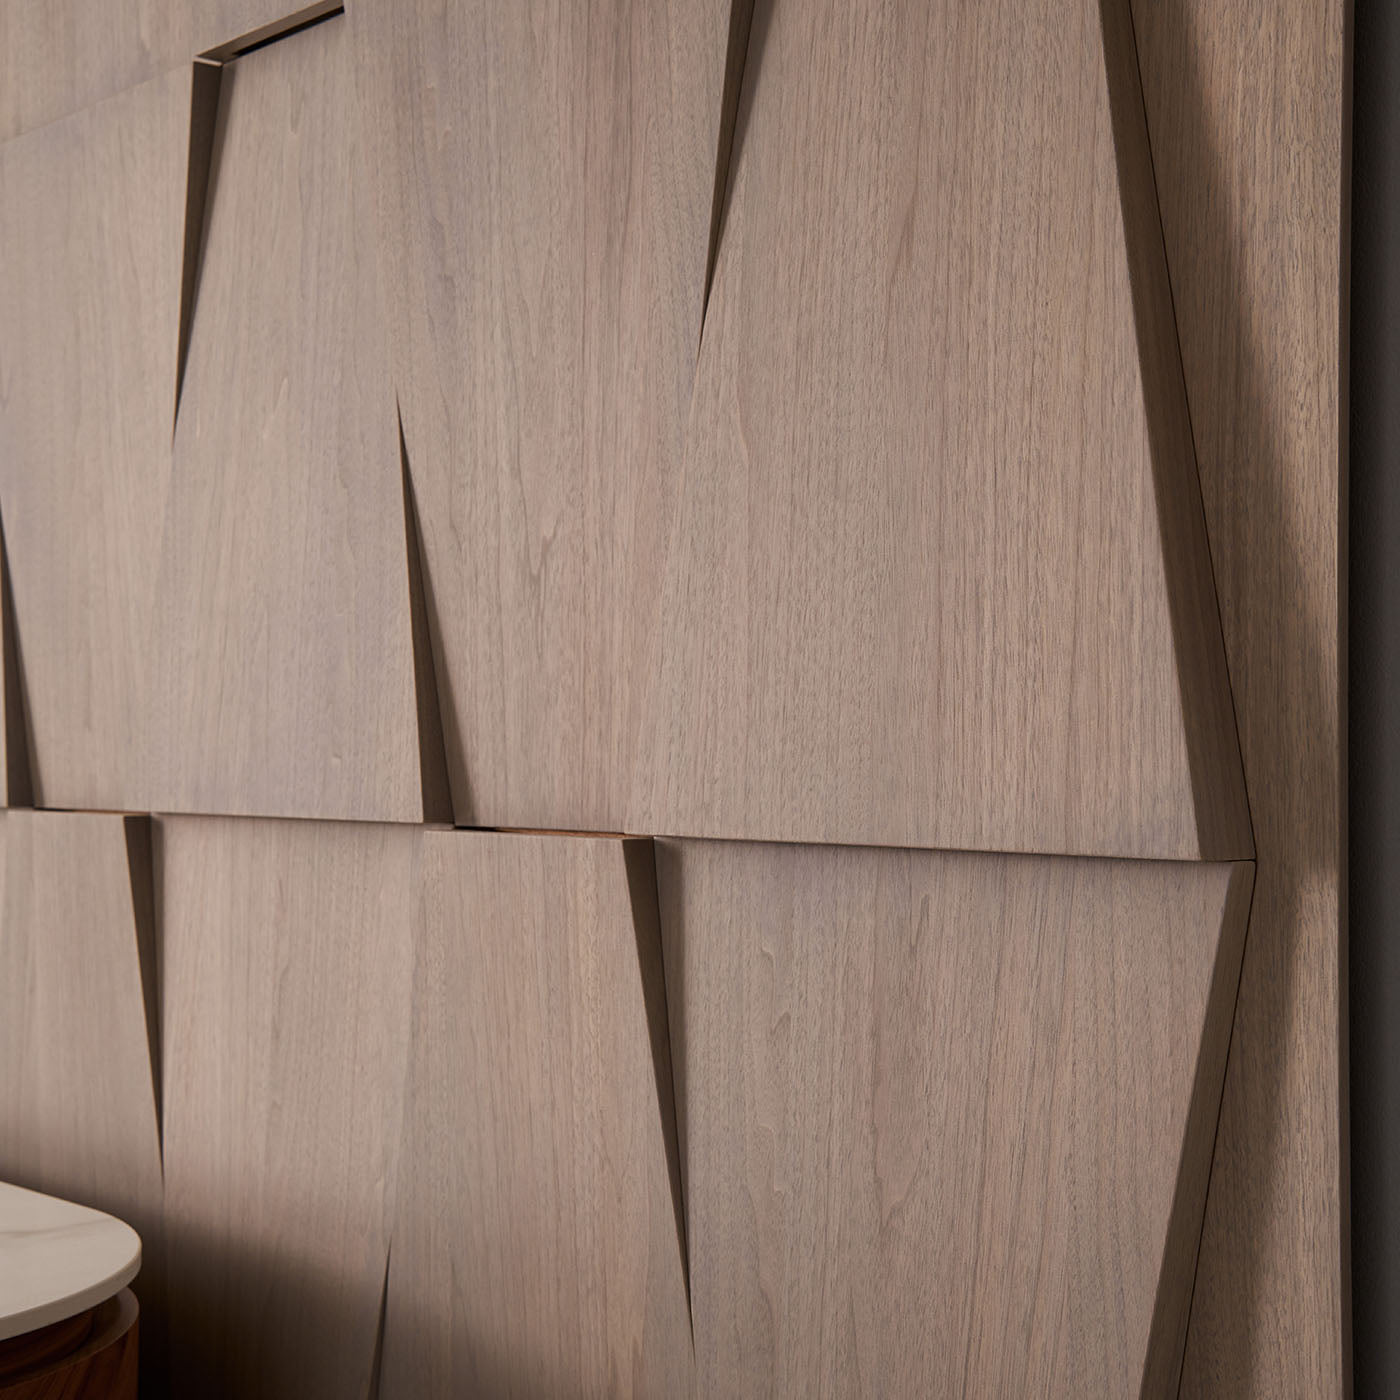 Modular Boiserie Wall Paneling in Canaletto Walnut Wood - Alternative view 1